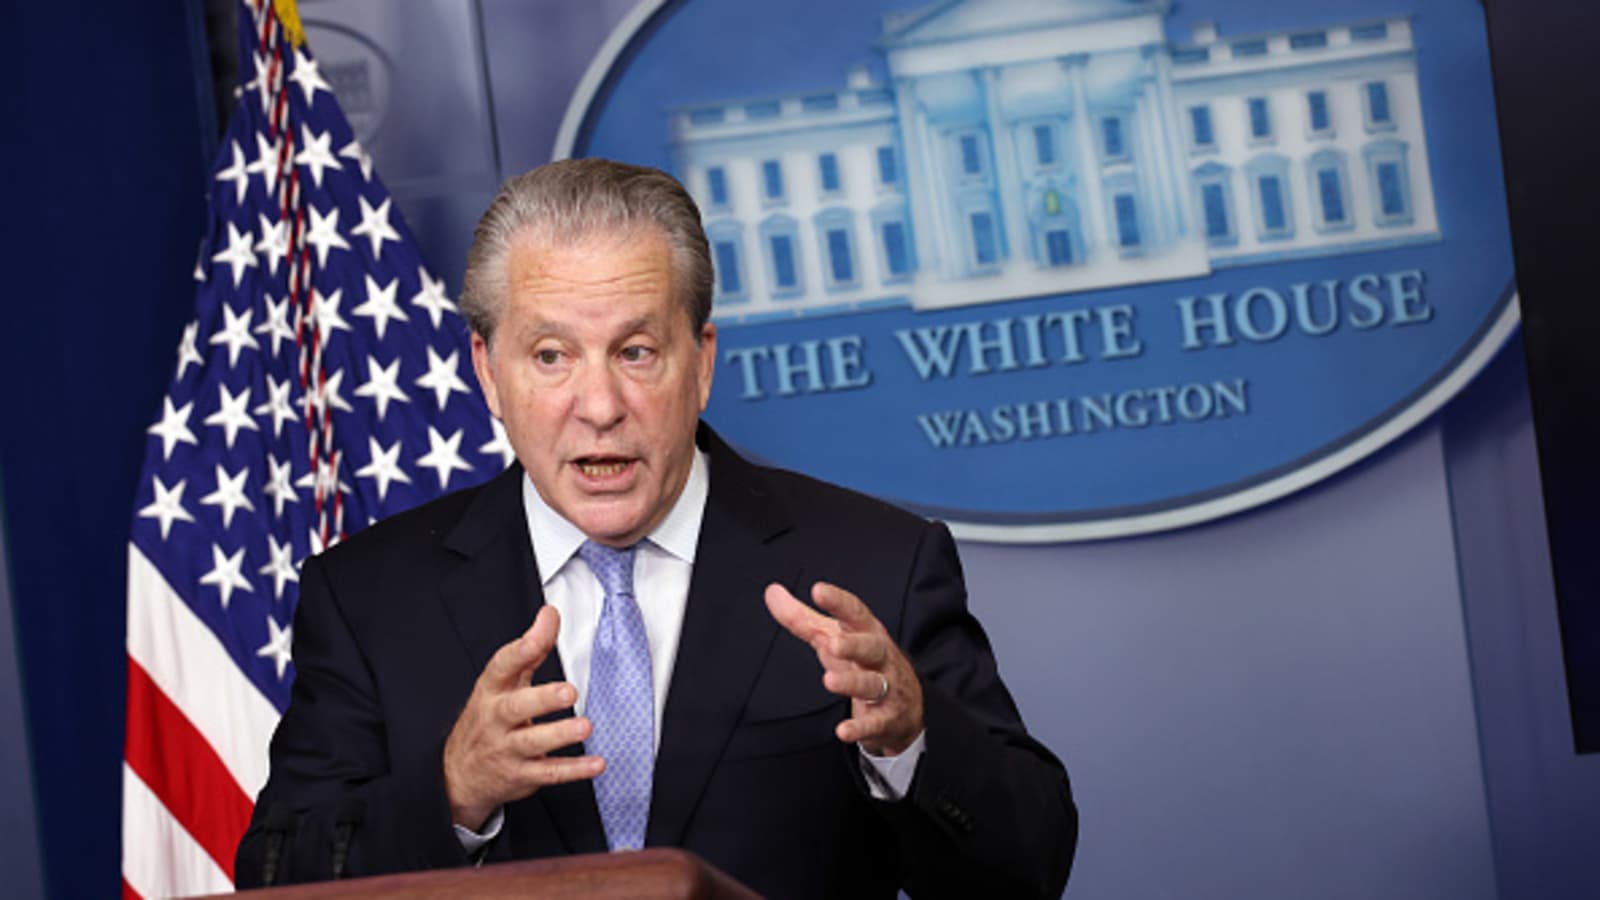 Biden Doing ‘Everything in His Power’ to Prevent Evictions, Sperling Says